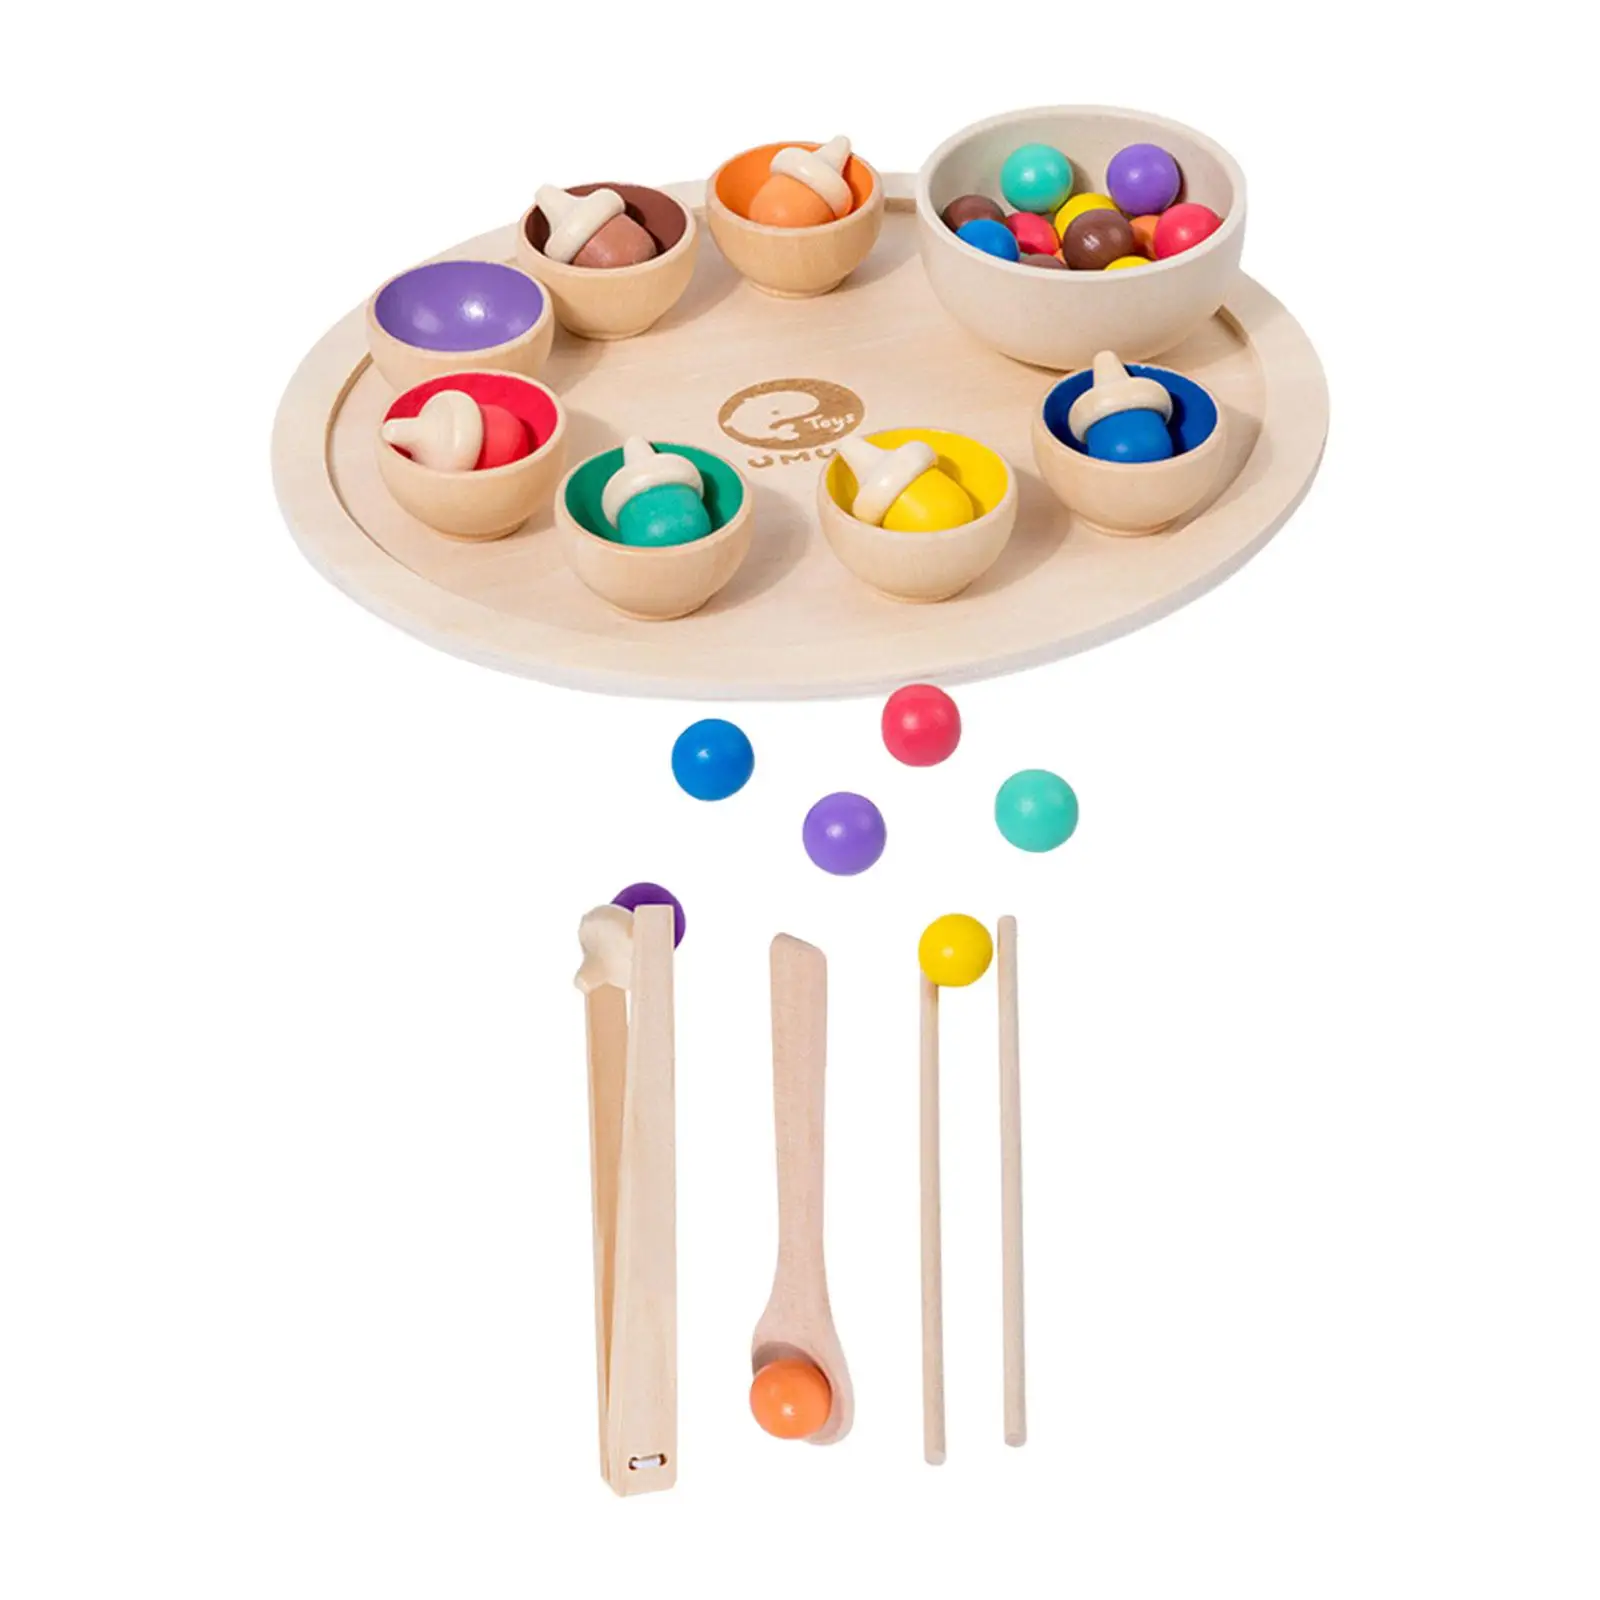 Montessori Bowls Toy Balls Matching Color Sorting and Counting Board Montessori Toy for Baby 1+ Year Old Kids Children